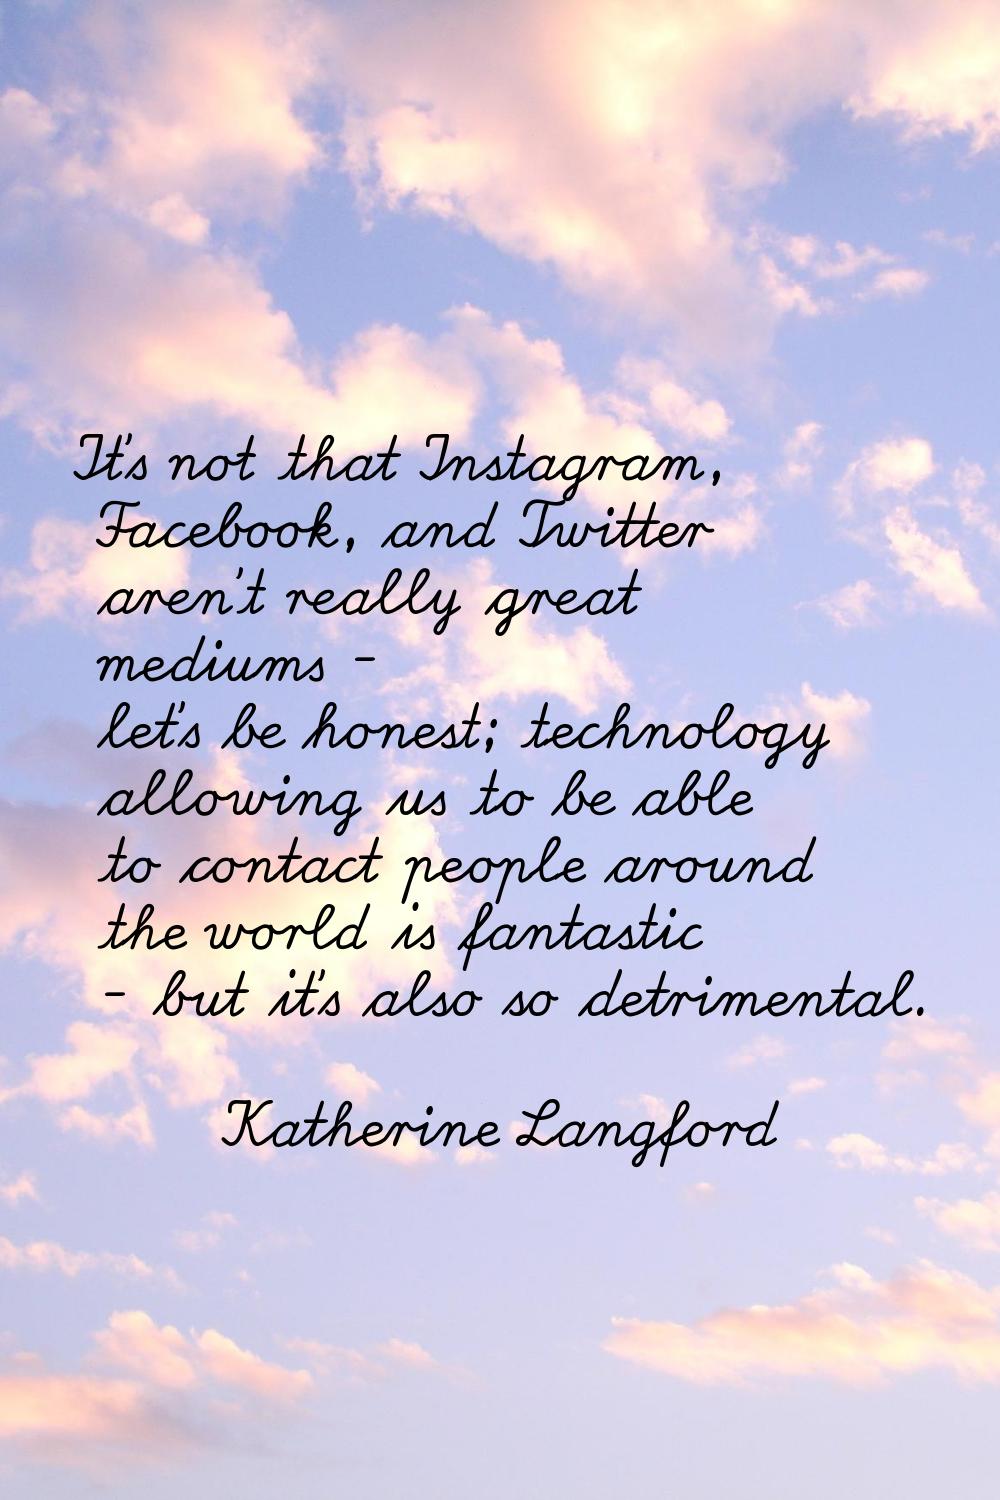 It's not that Instagram, Facebook, and Twitter aren't really great mediums - let's be honest; techn